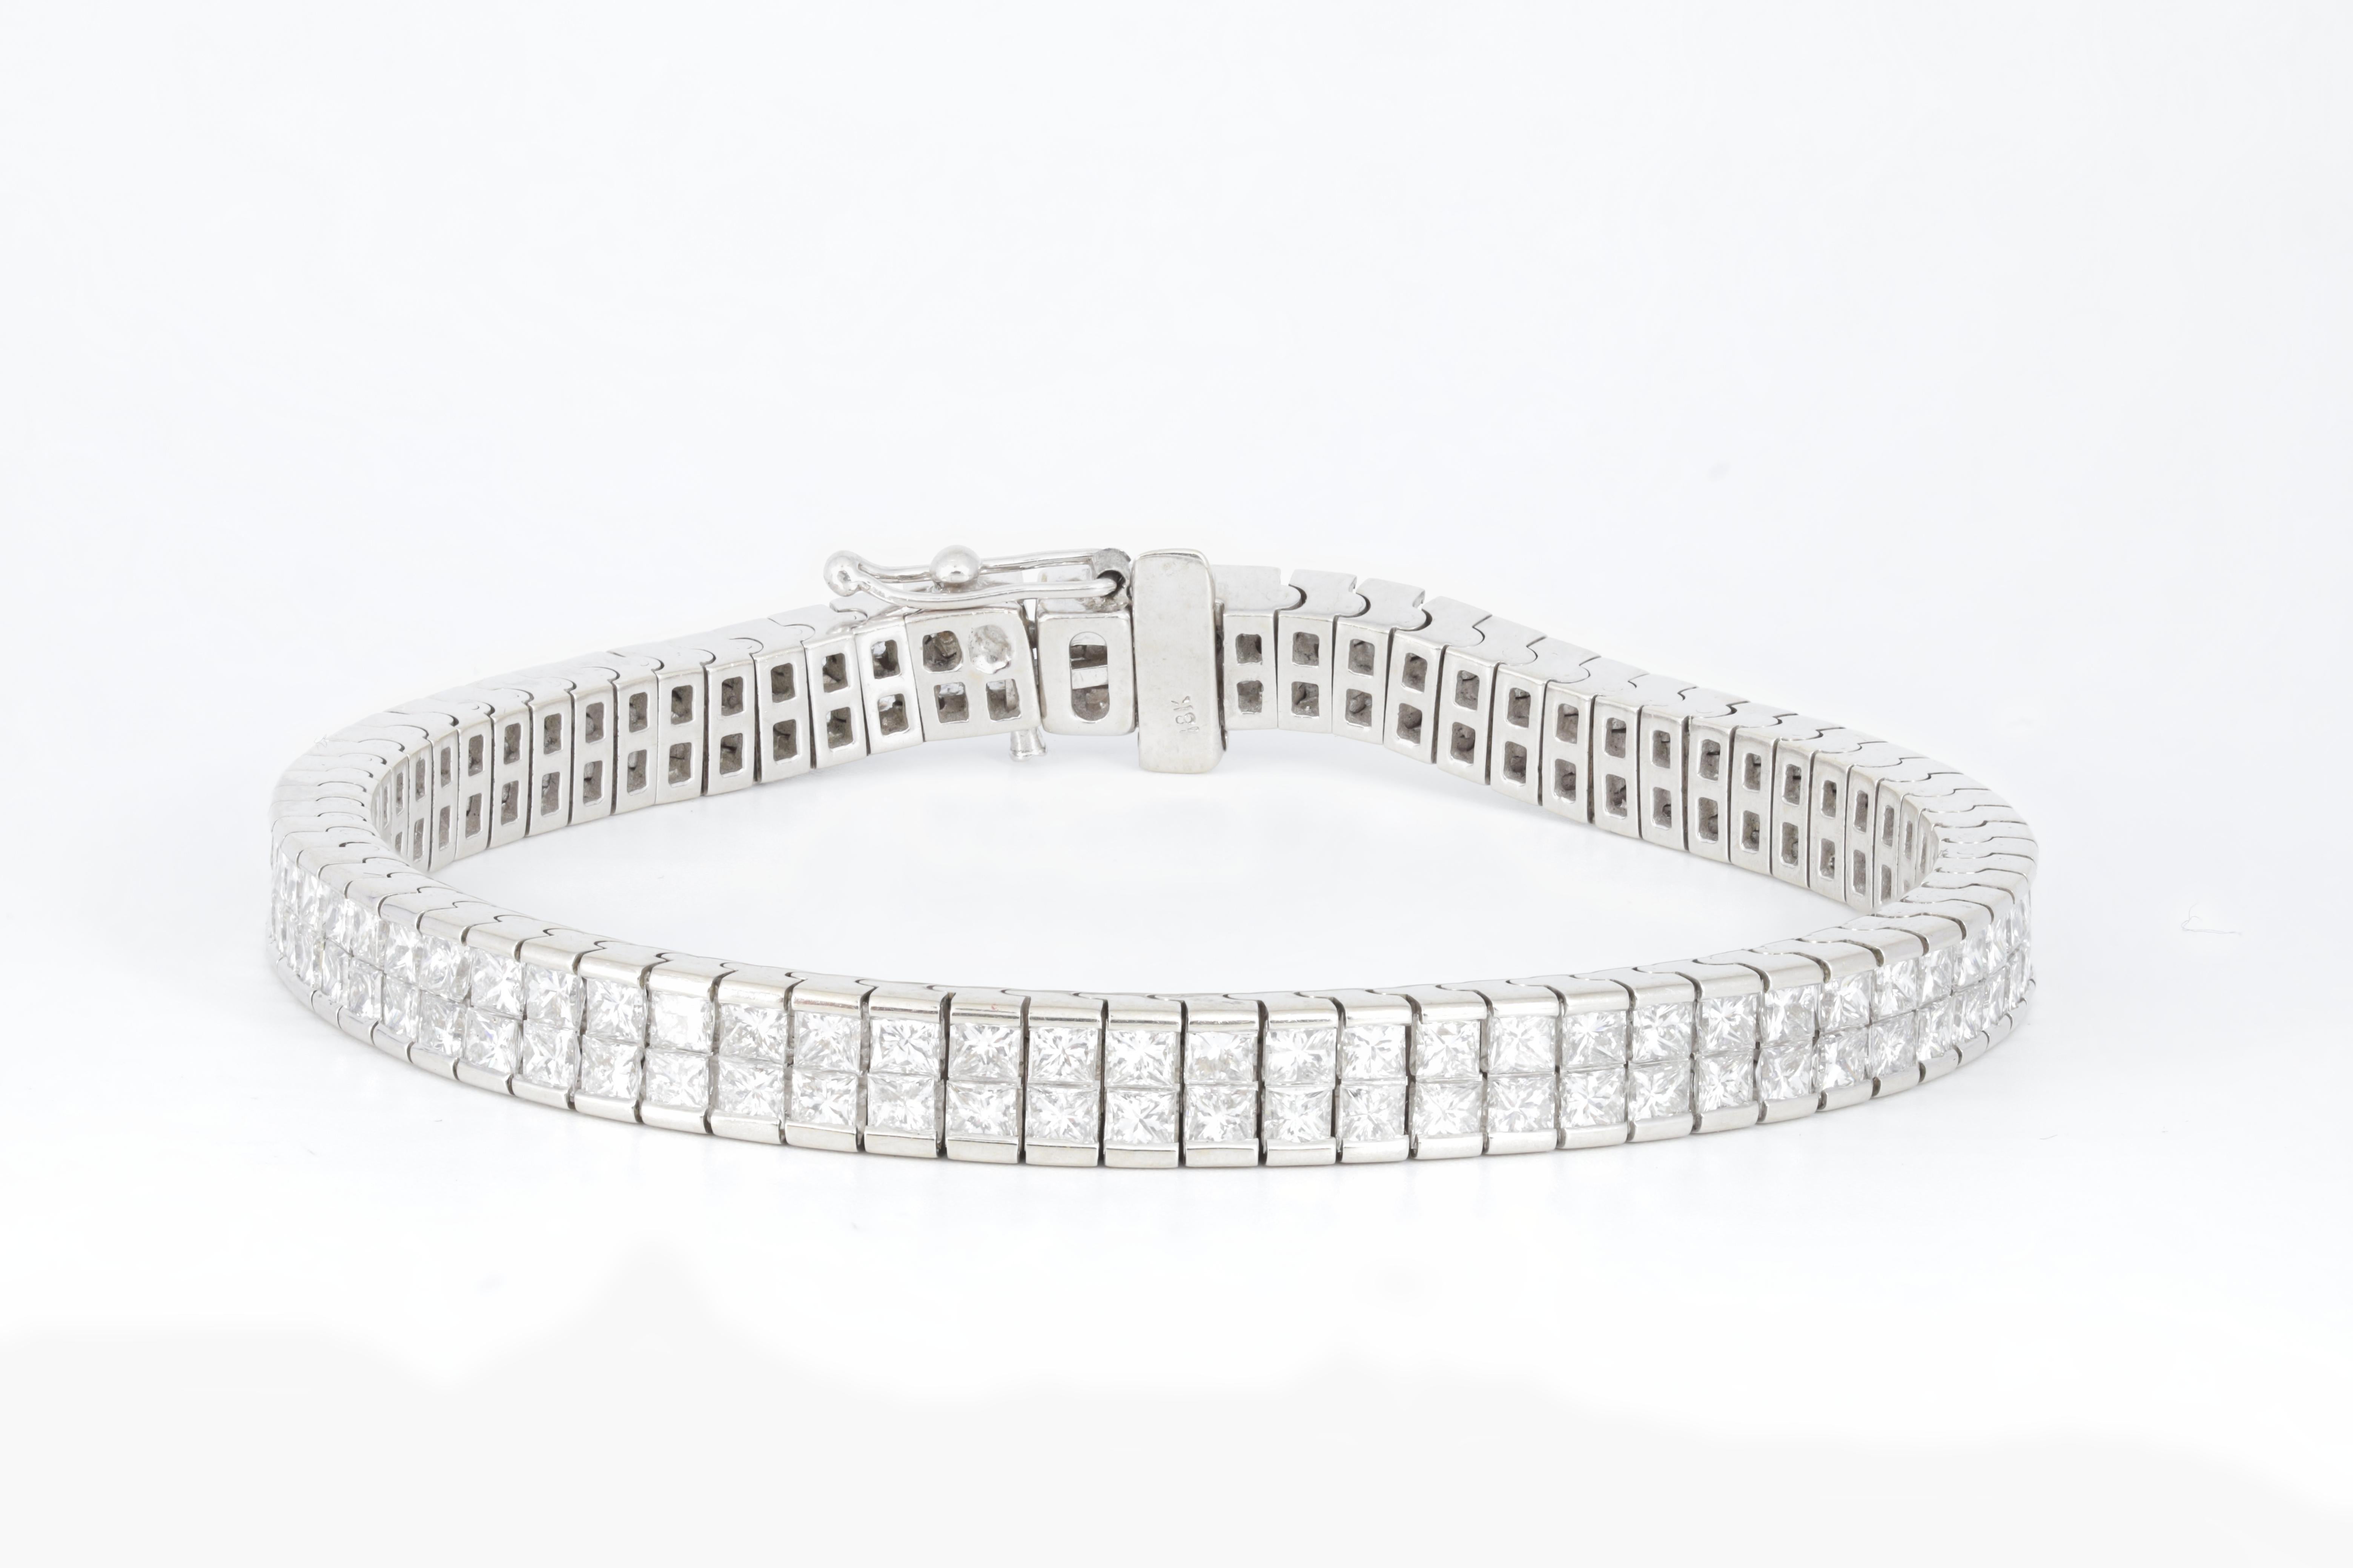 18 kt white gold diamond tennis bracelet adorned with 2 rows of 12.30 cts tw of channel set princess cut diamonds (148 stones)
Diana M. is a leading supplier of top-quality fine jewelry for over 35 years.
Diana M is one-stop shop for all your